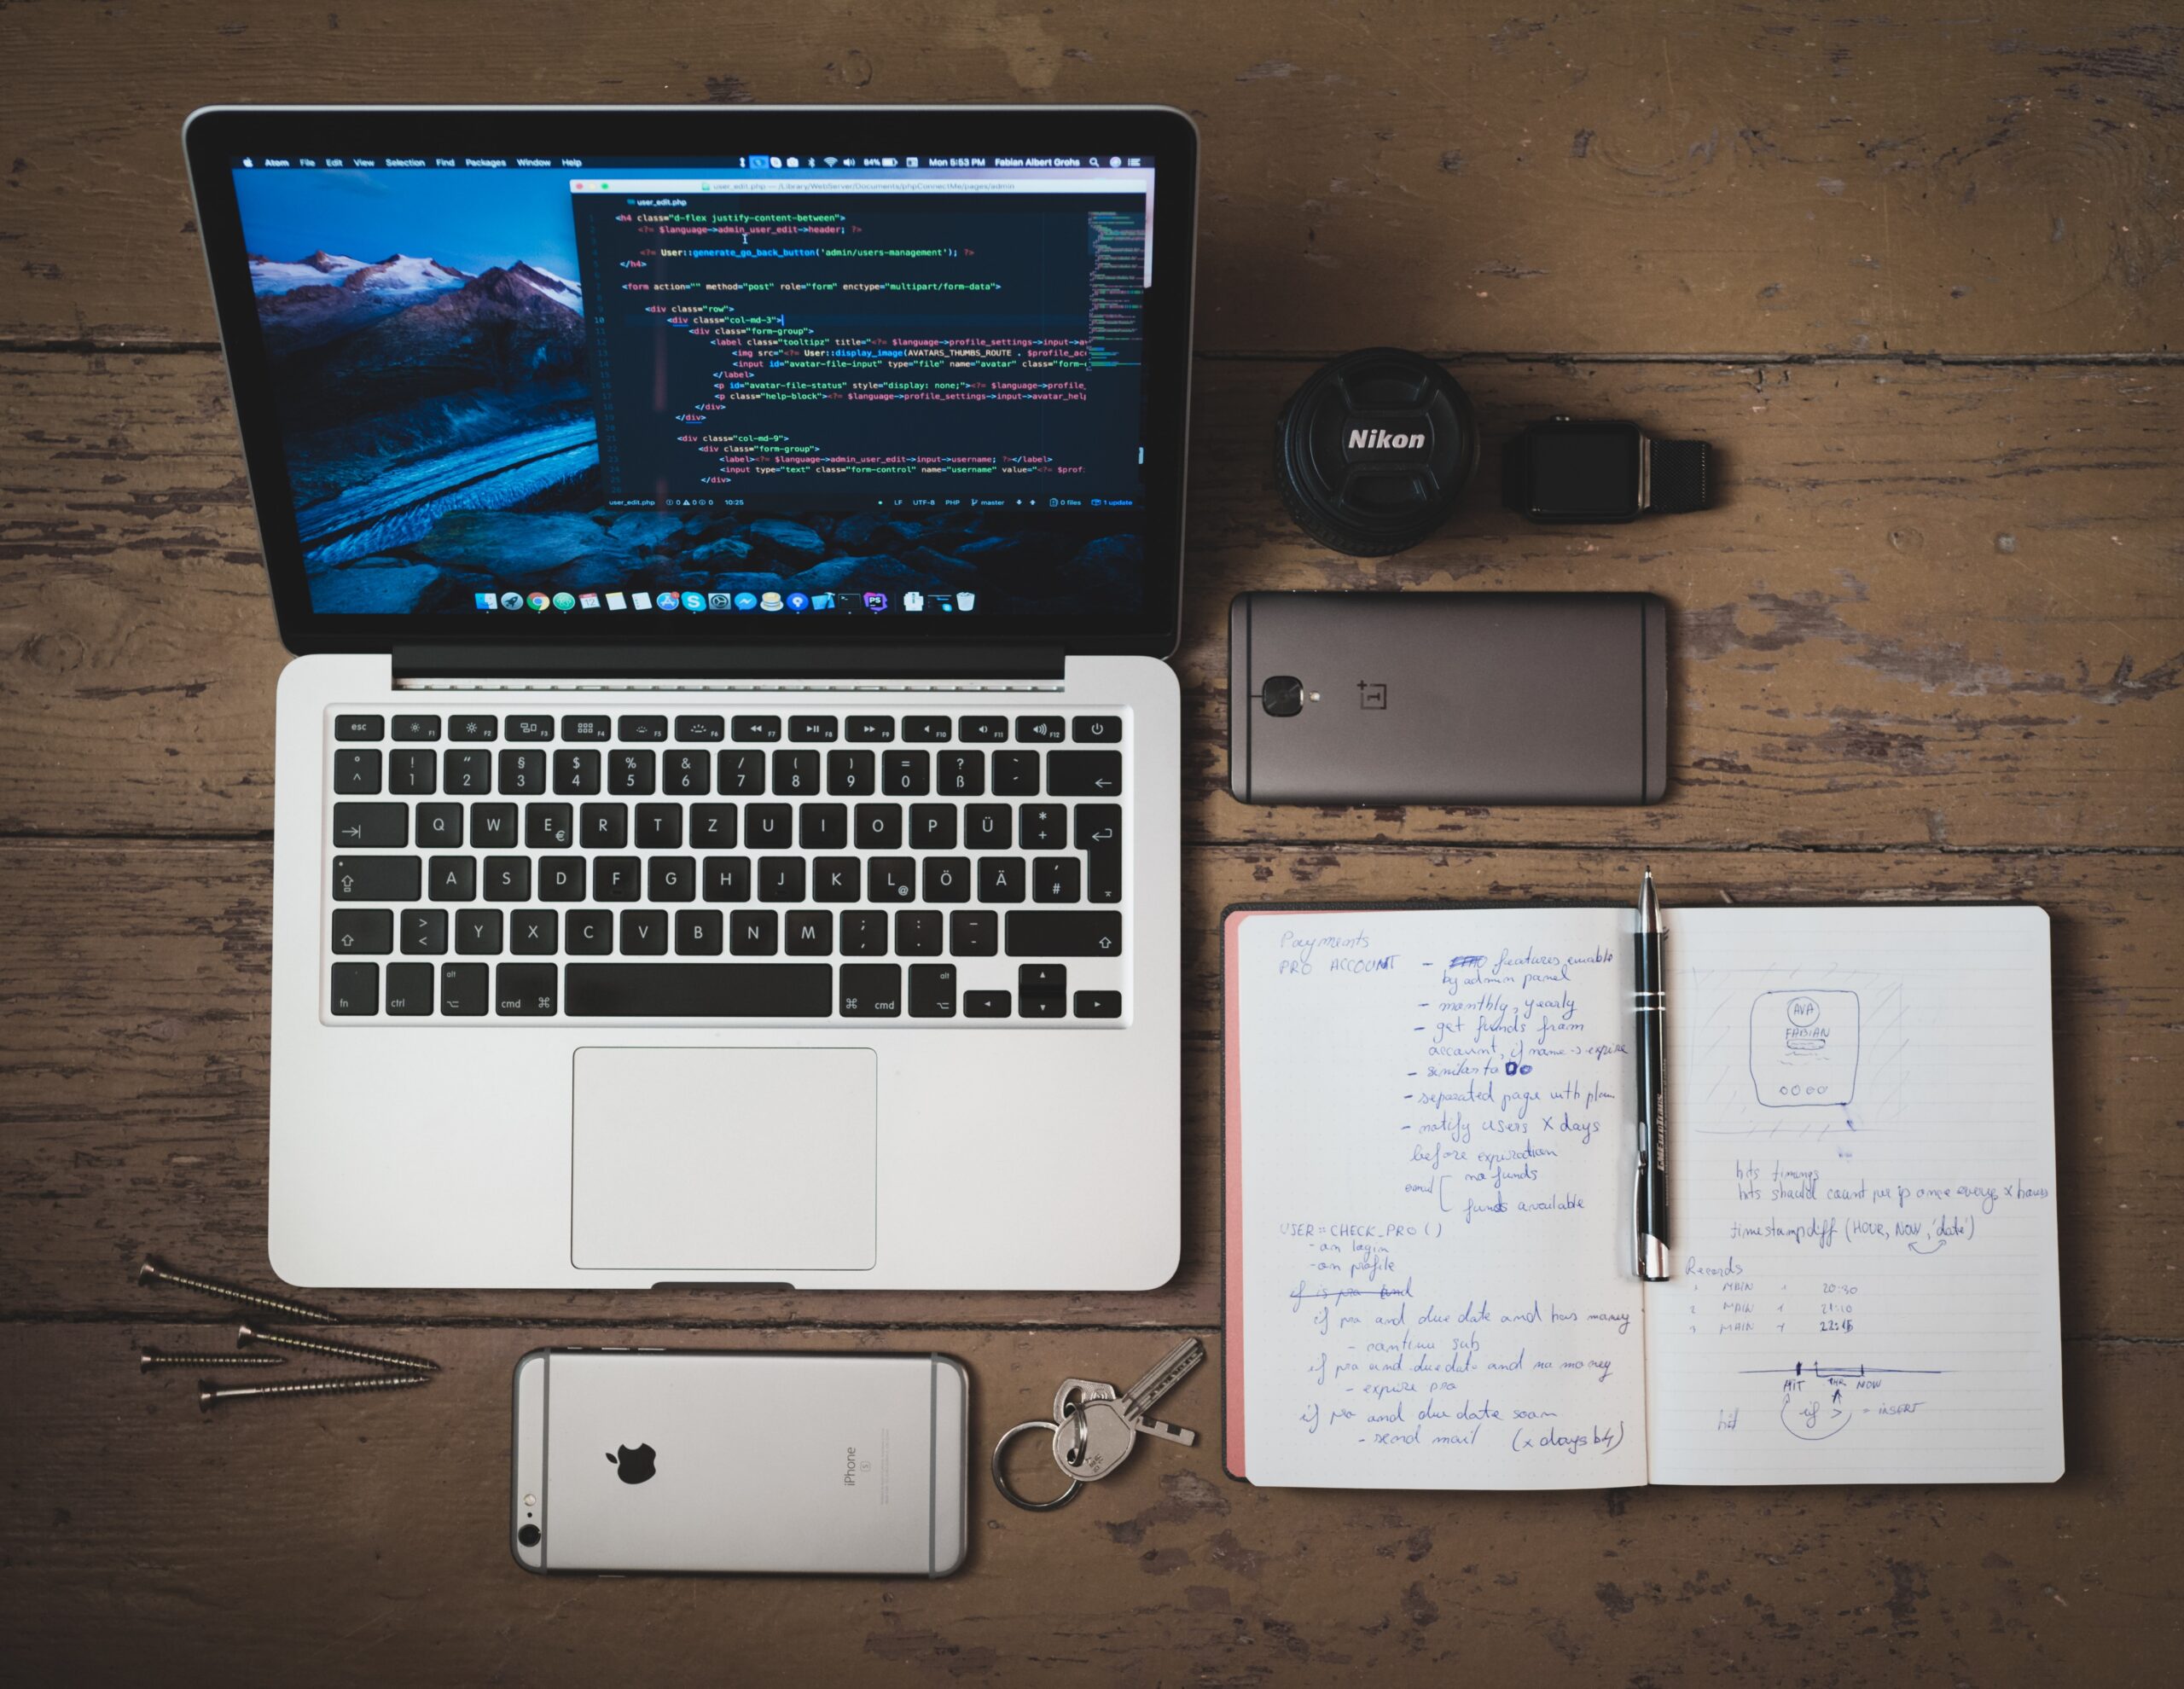 A laptop with coding on the screen sits on a desk next to two smartphones, a pair of headphones, an open notebook with writing inside, a pair of keys, and four screws.